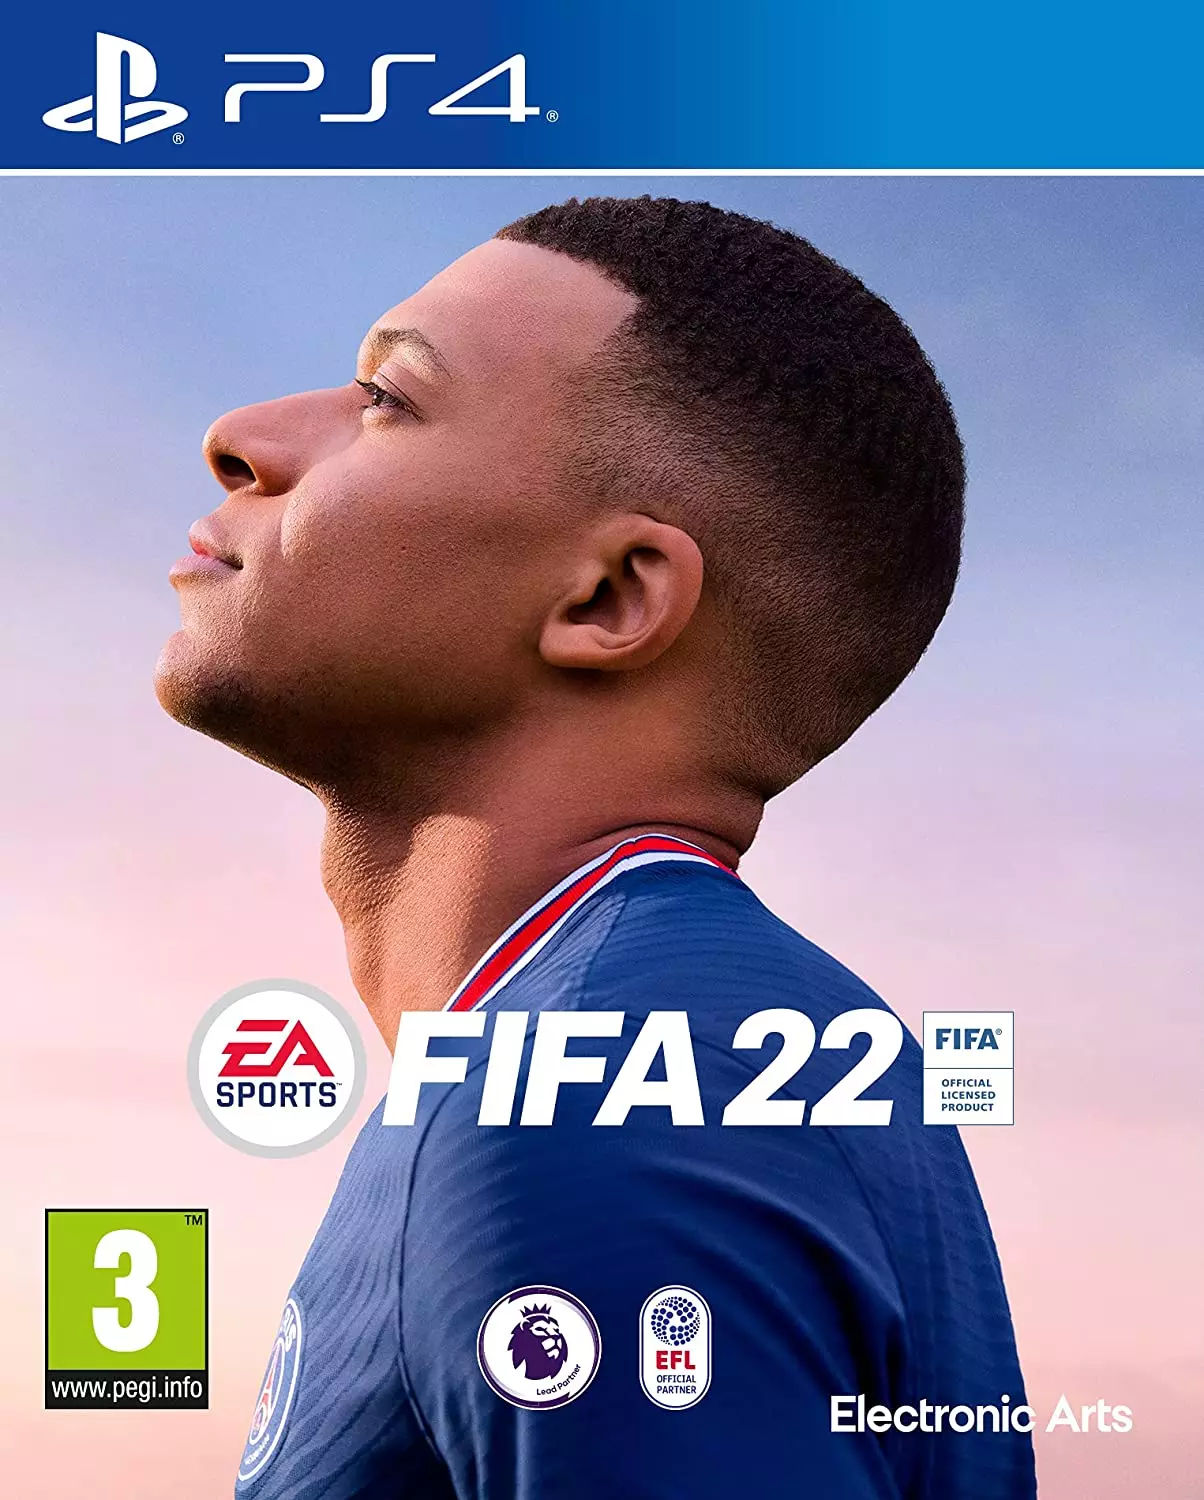 These are product images of FIFA 22 PS4 by SharePal.